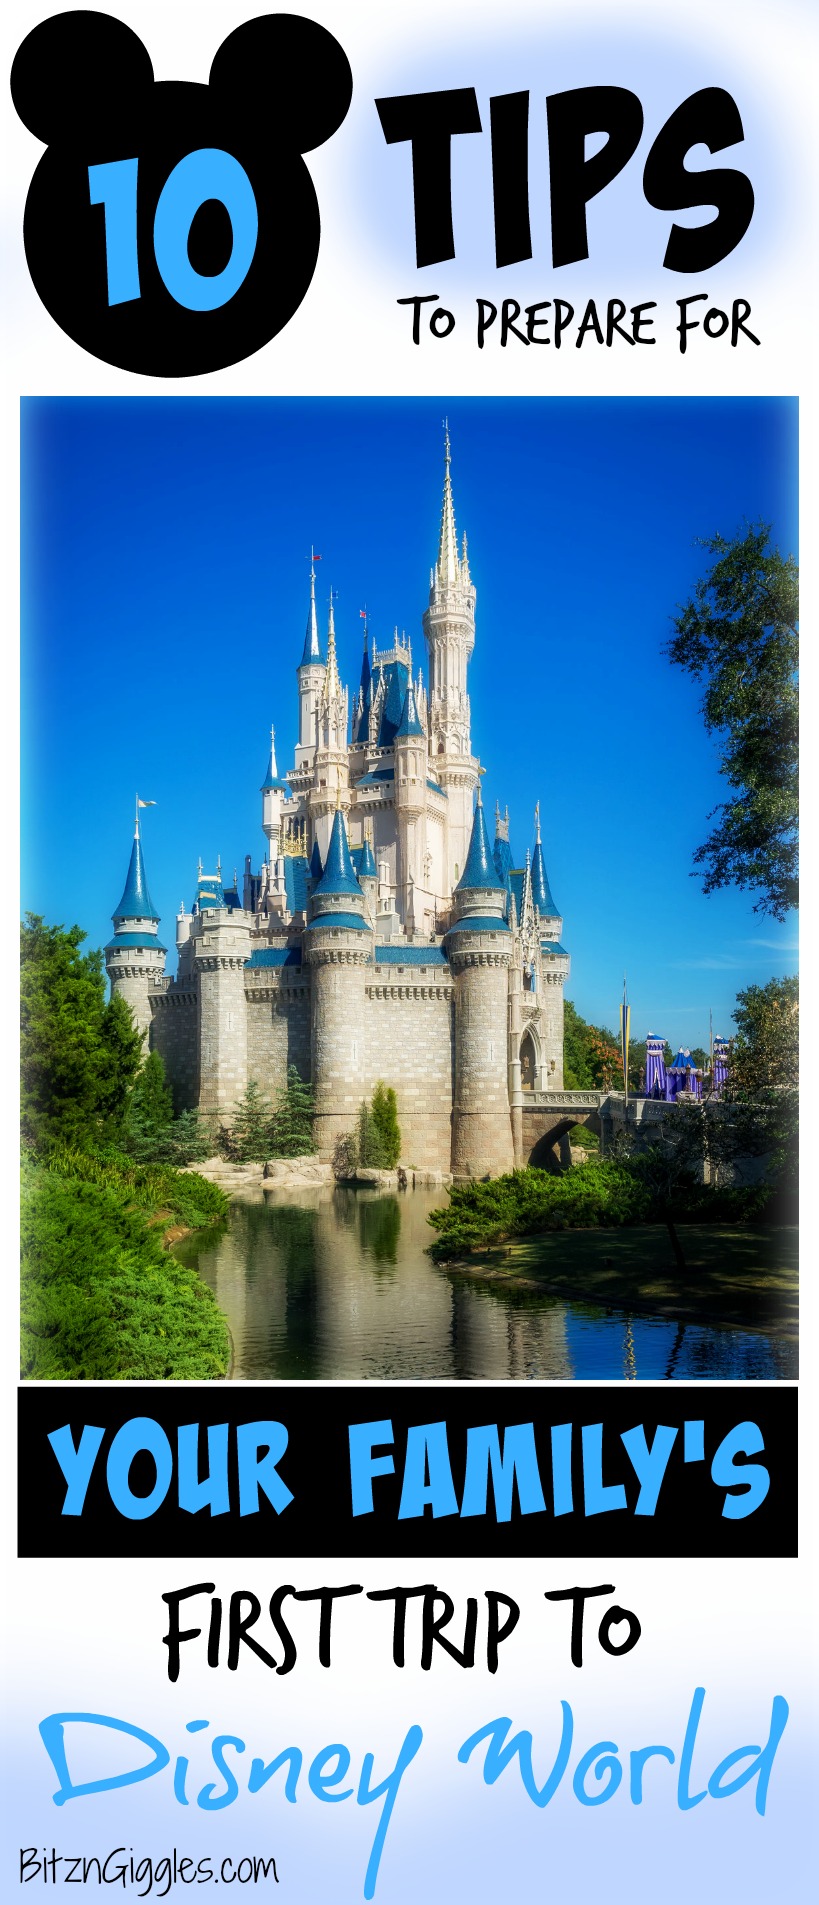 10 Tips to Prepare for Your Family's First Trip to Disney World - You've booked your trip. . .now what? Here are 10 ways to build some magic into your planning for a trip your family will never forget!